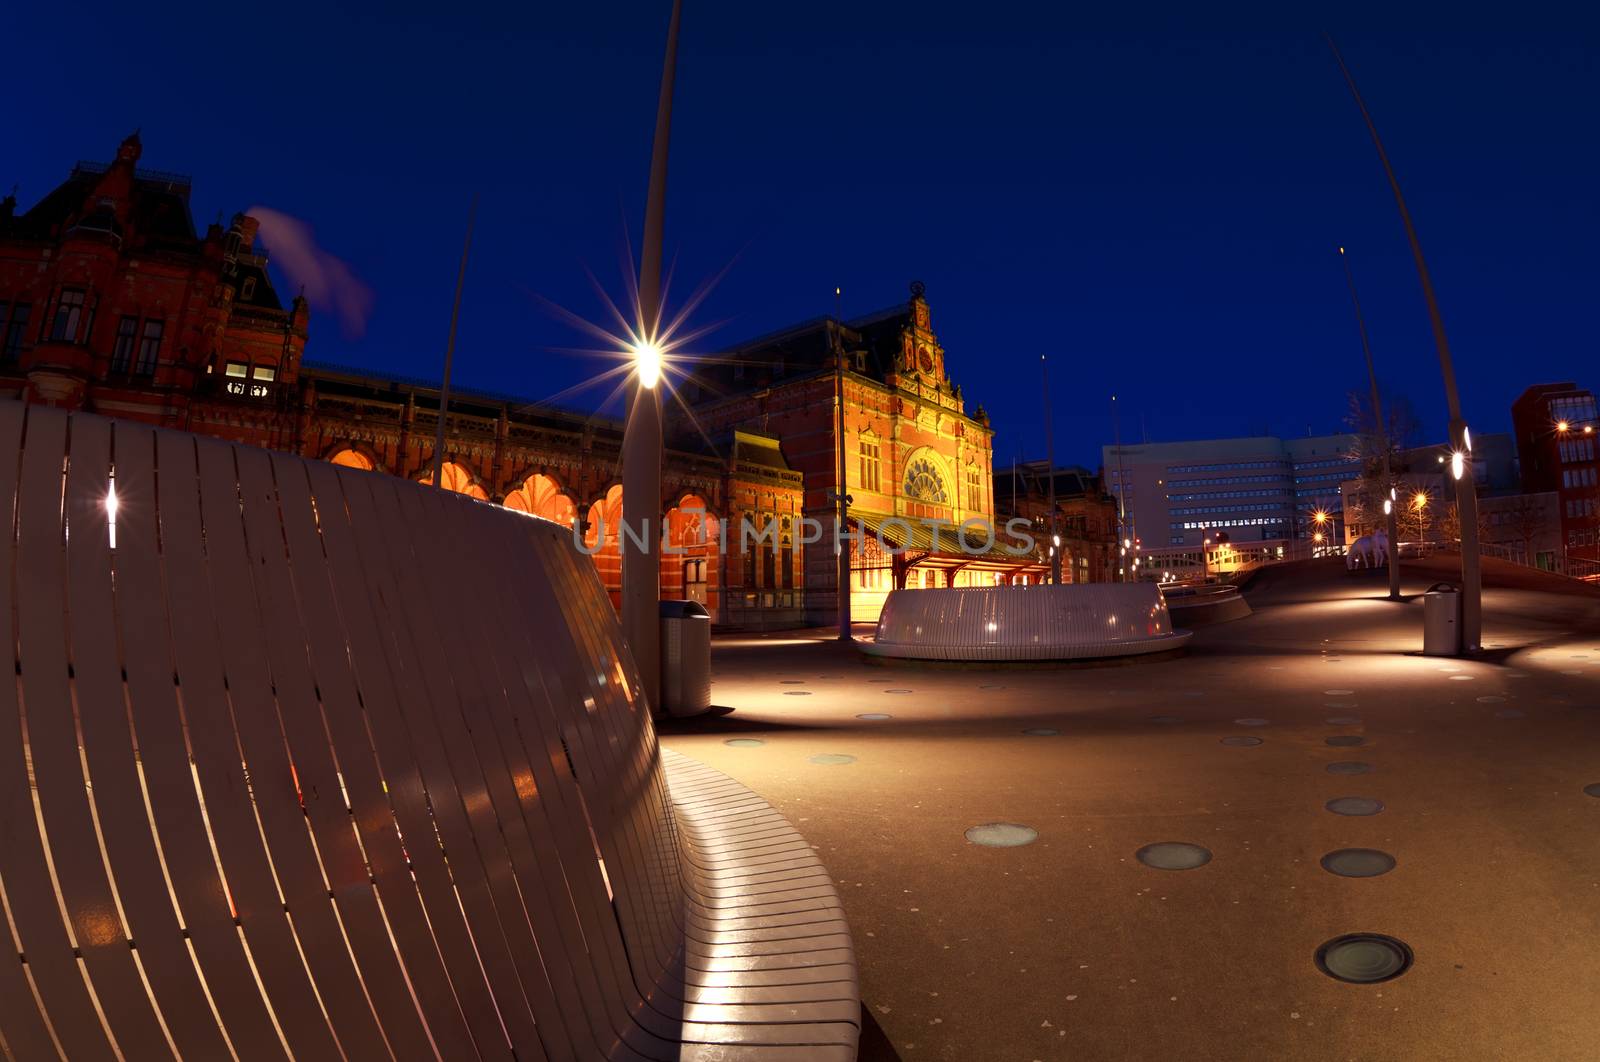 Central Station in Groningen by night, Netherlands